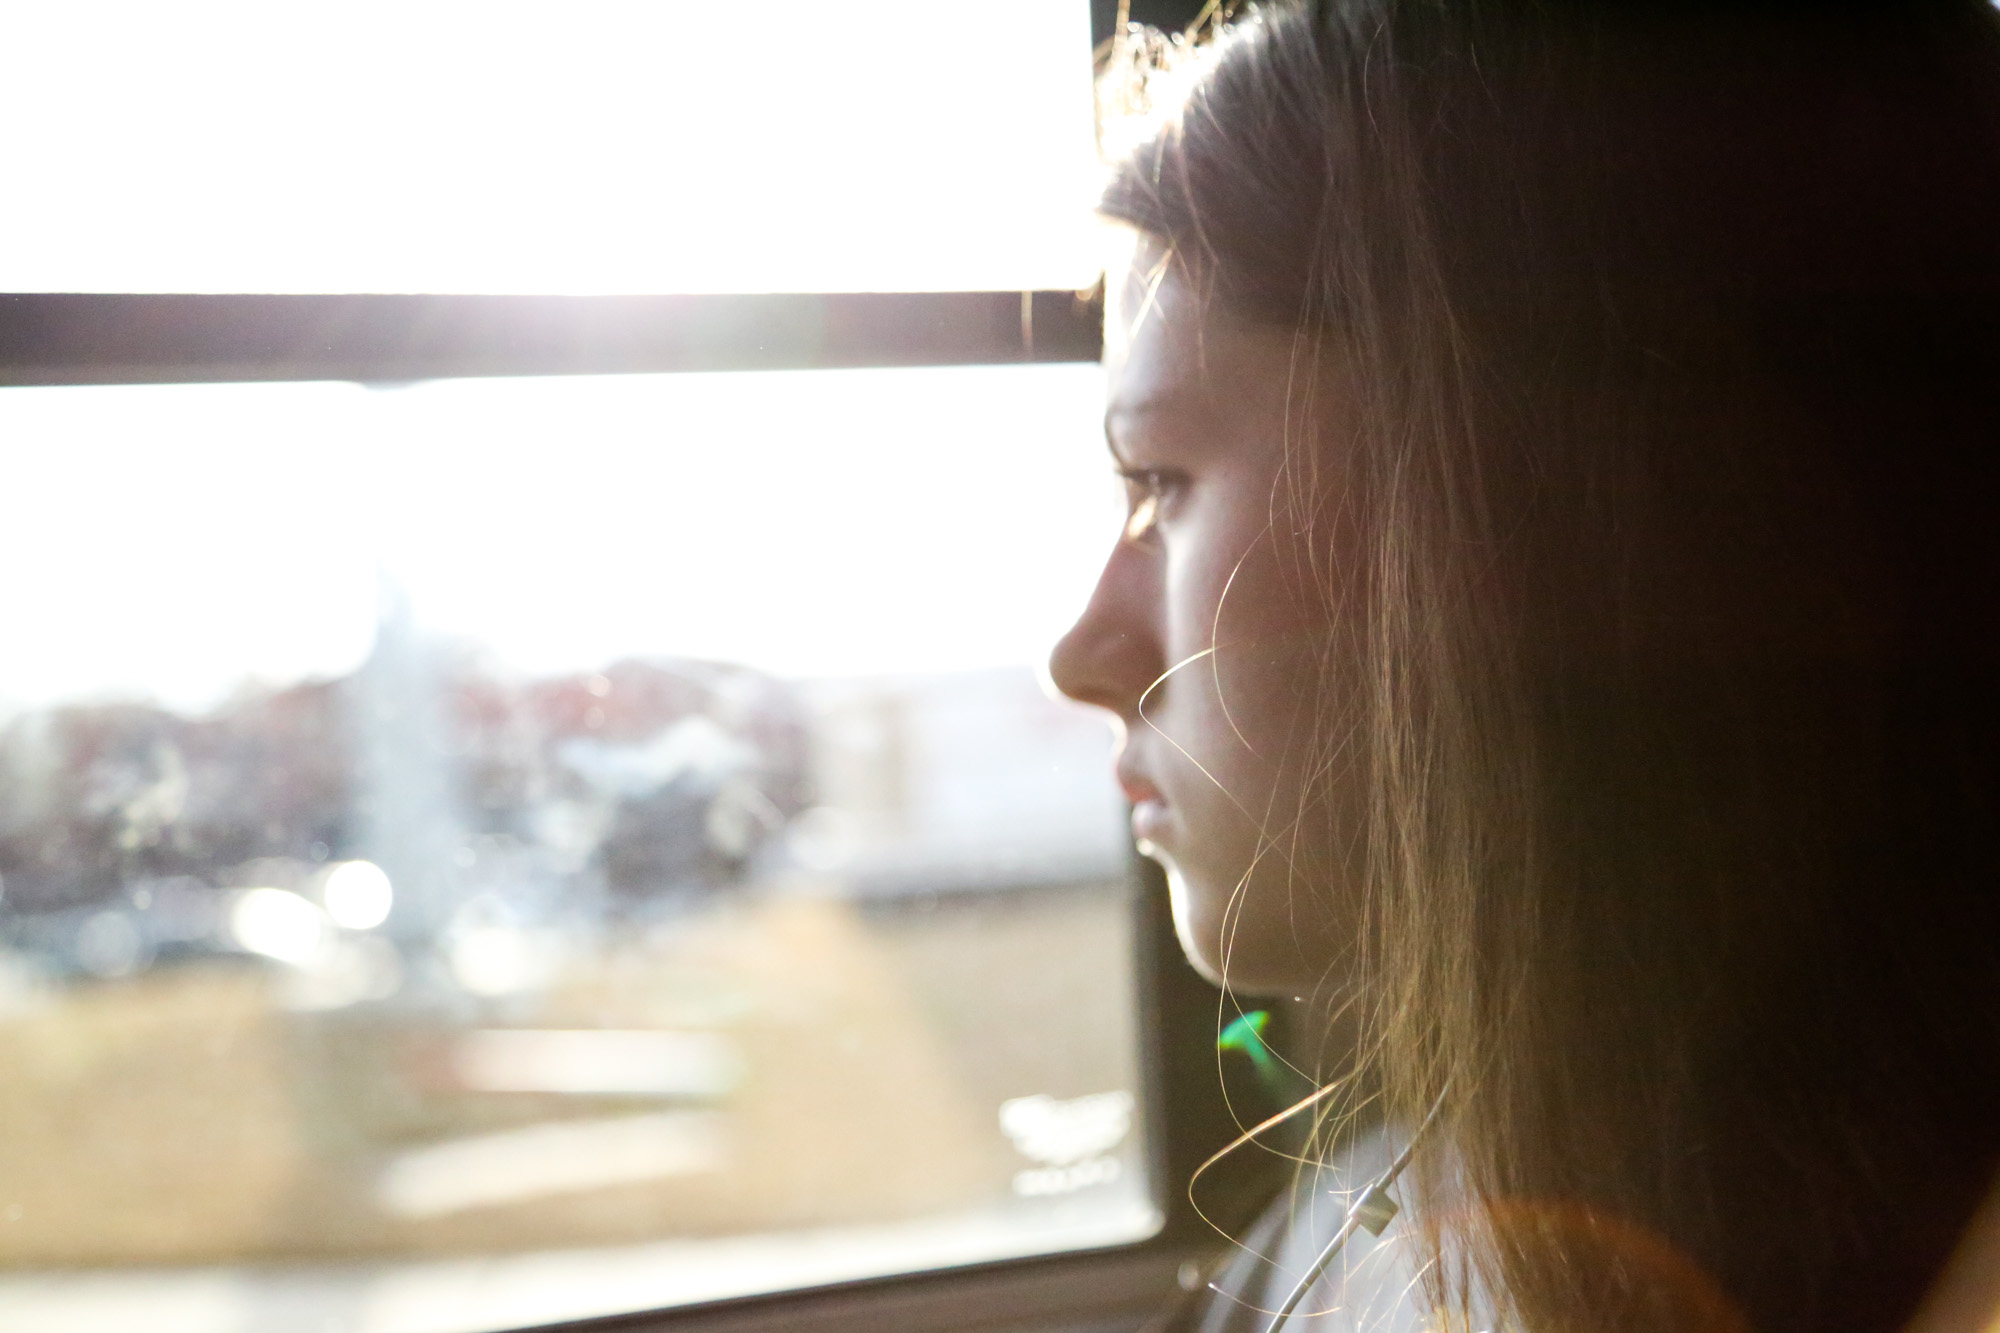  Emily Wynne looks outside through the school bus window after having snacks on their way to Athens Drive High School on Feb.10, 2017. 